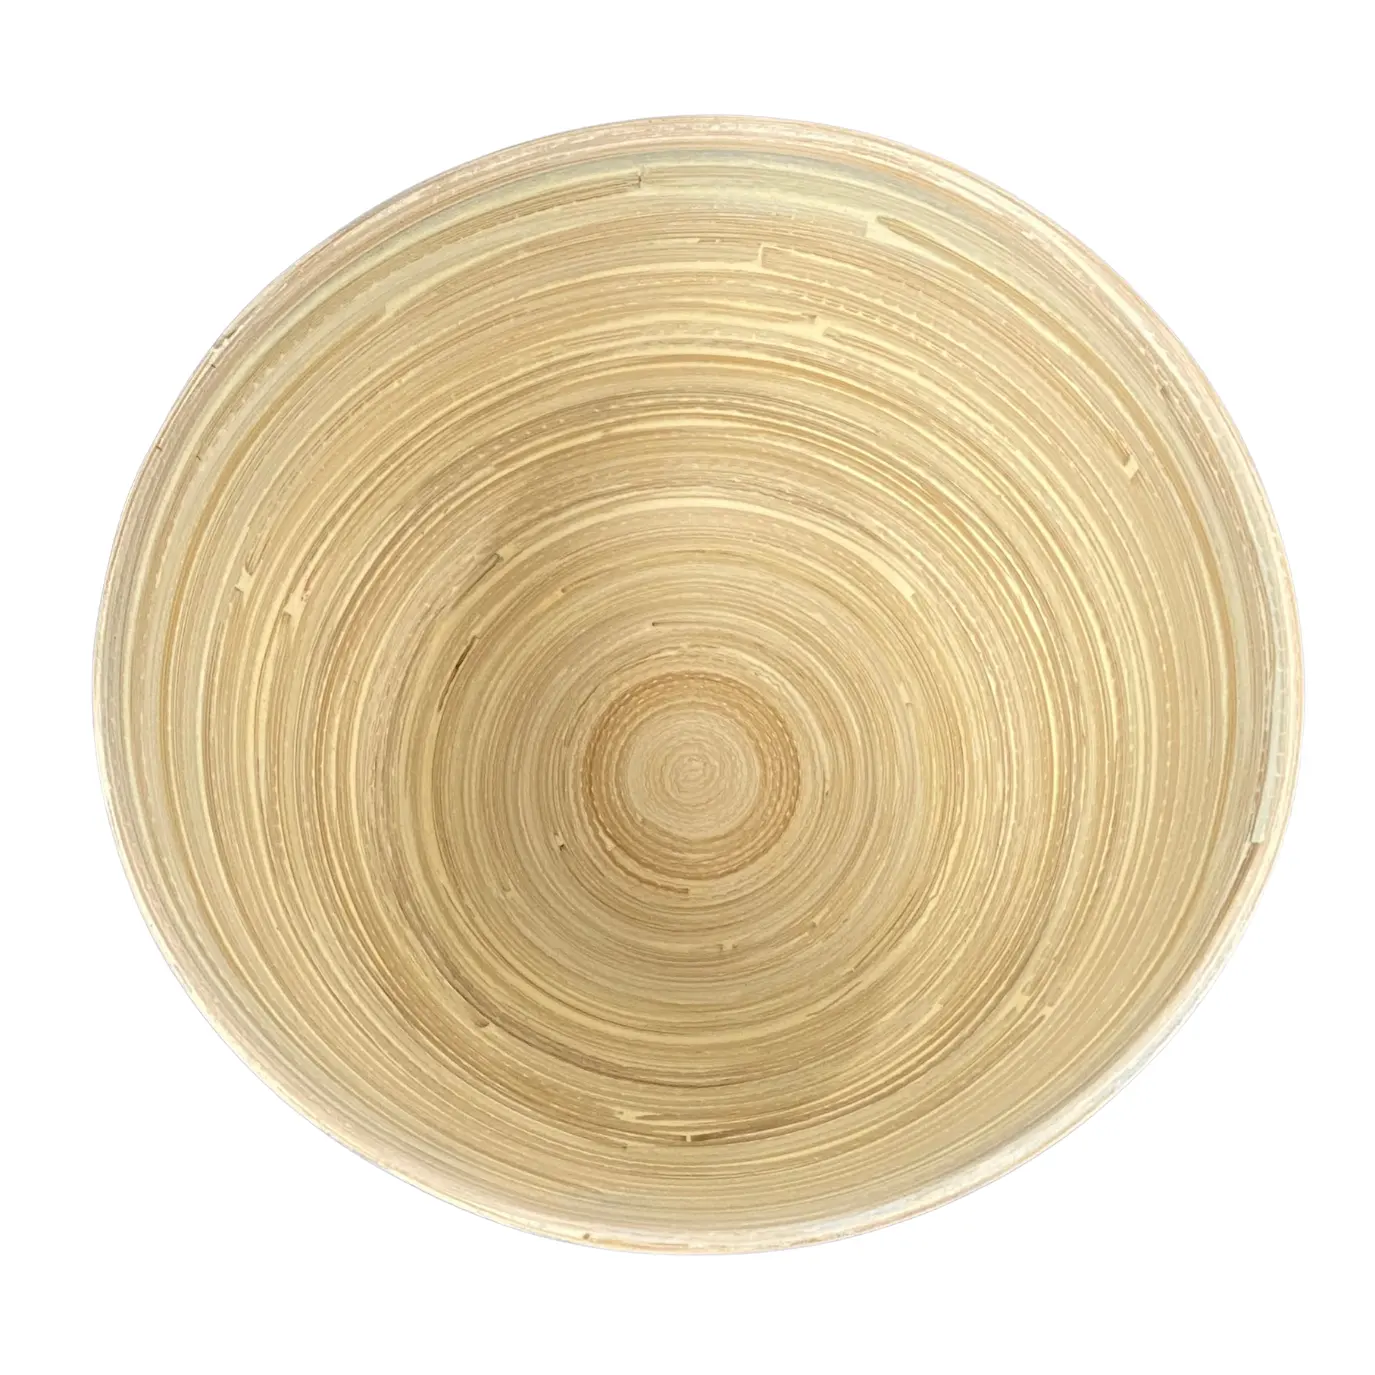 Good Price handicraft coiled bamboo ecofriendly Organic spun bamboo bowls safe for health Homeware Crafts Made In Vietnam